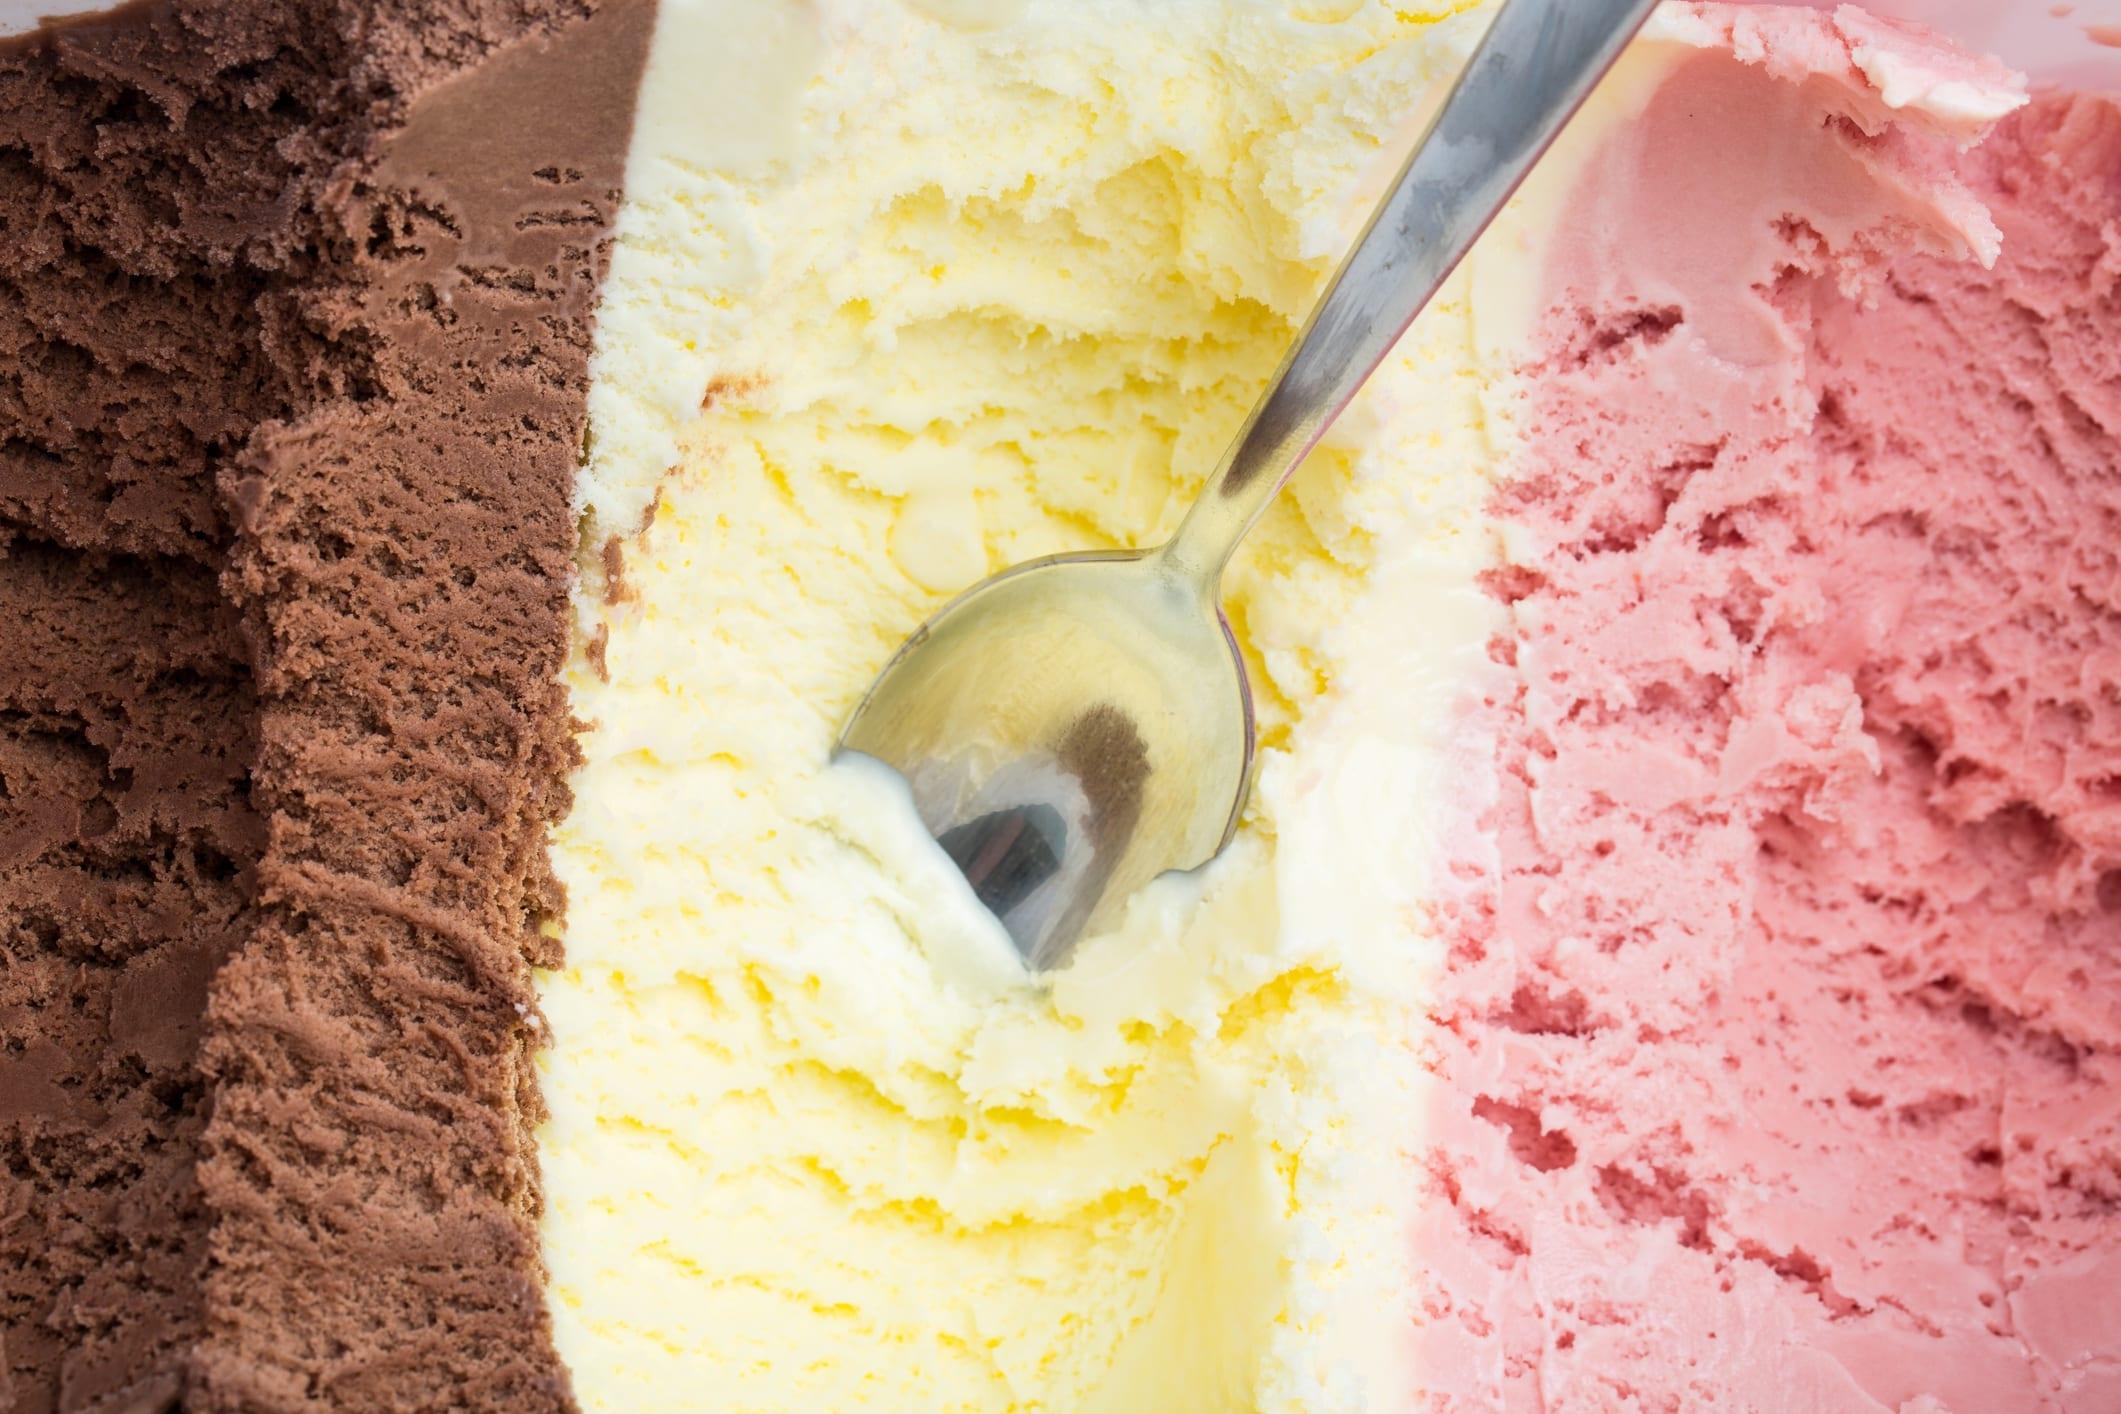 ice cream: A spoon in a large ice box with chocolate, vanilla and strawberry ice cream